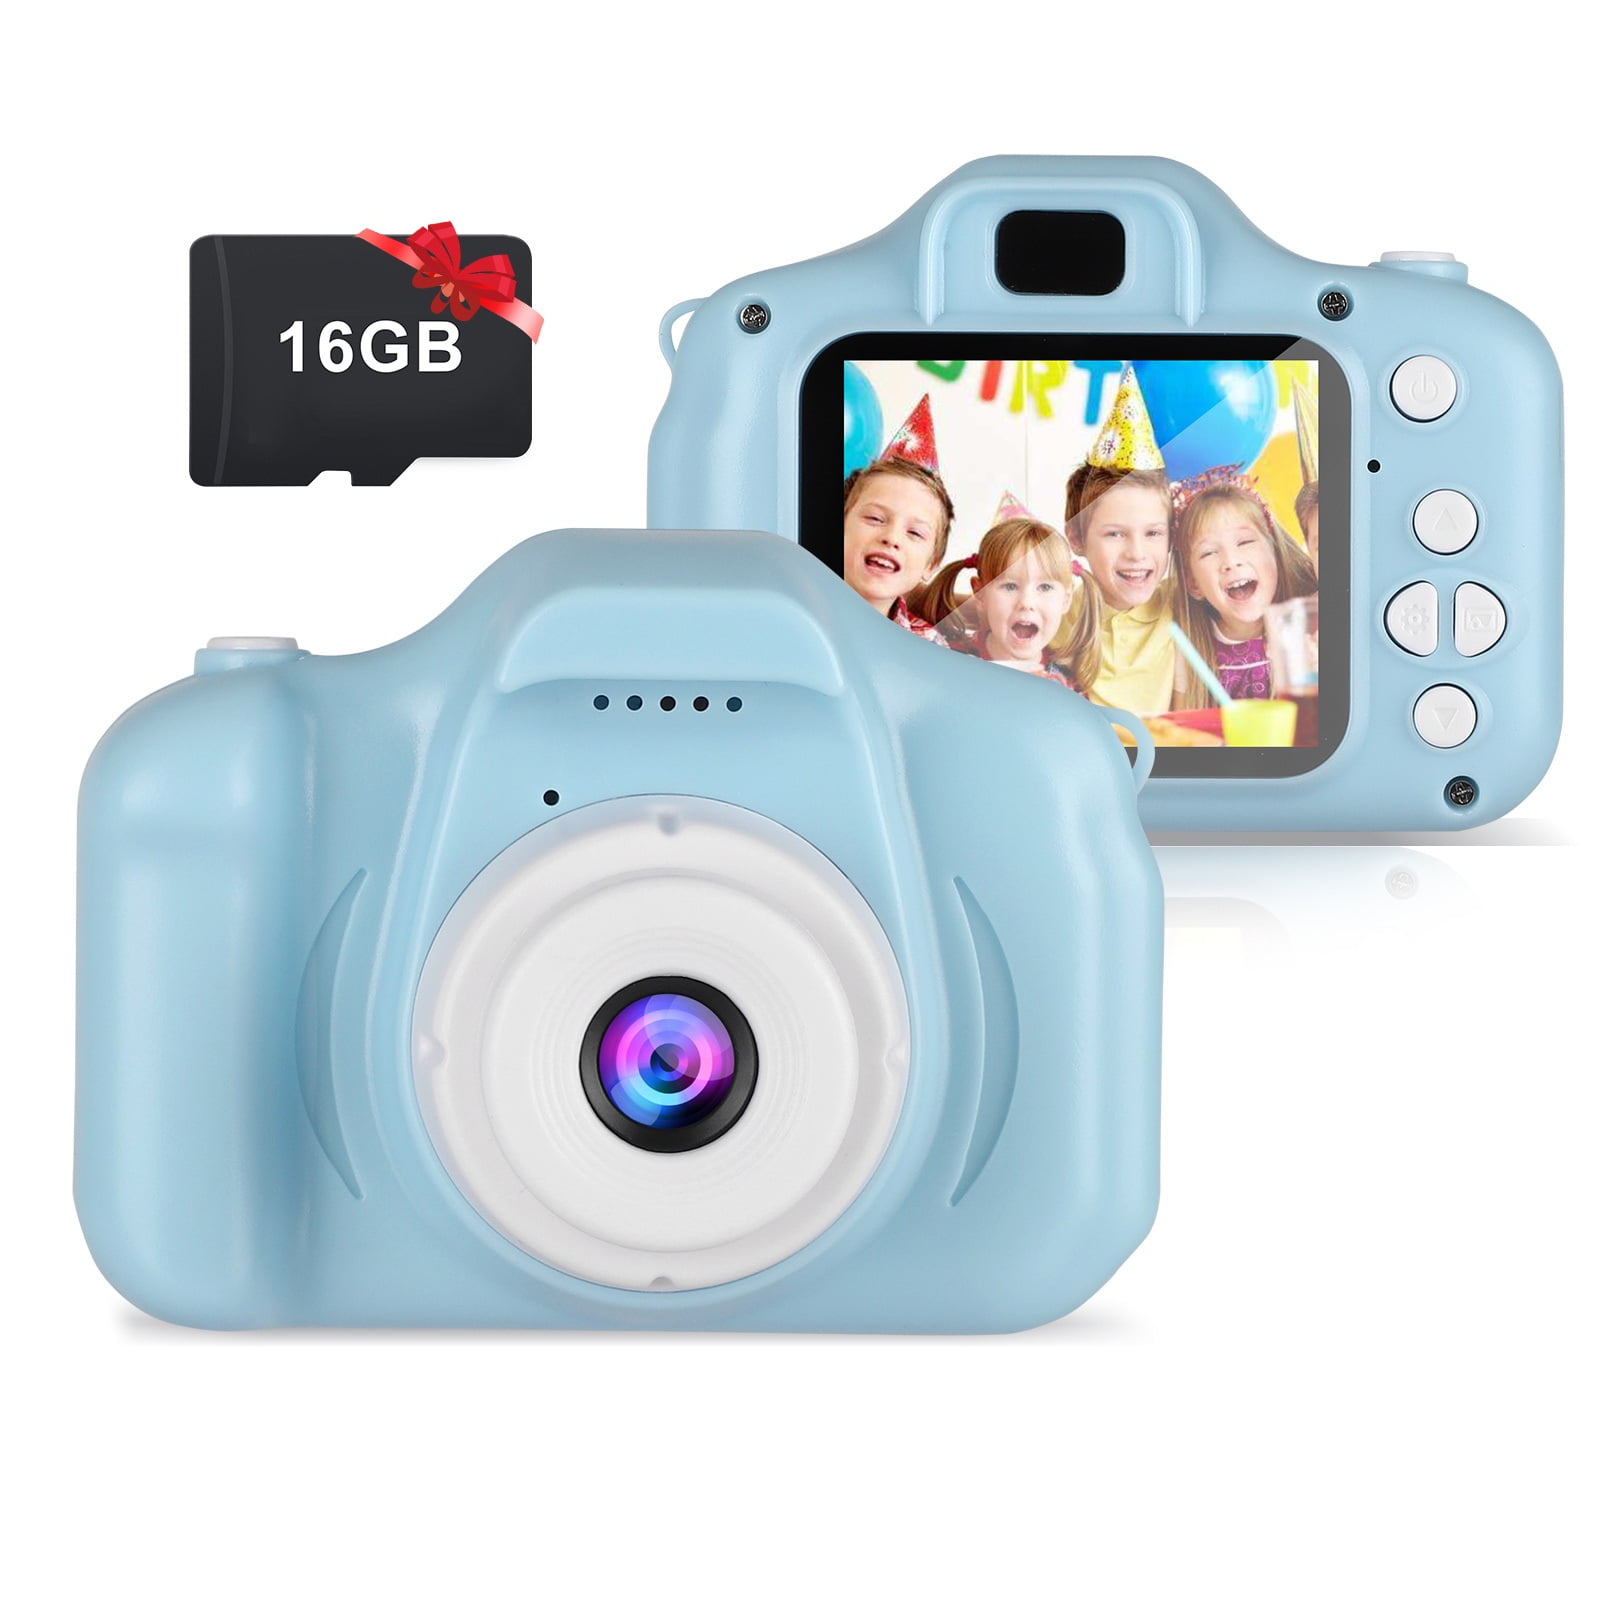 Child 1080P Camcorderr for Outdoor/Play/Christmas/Birthday Perfect Choice for Boys and Girls 2.0 Inch blue WANYANGG Kids Digital Camera Kids Mini Cute Camera for Boys and Girls